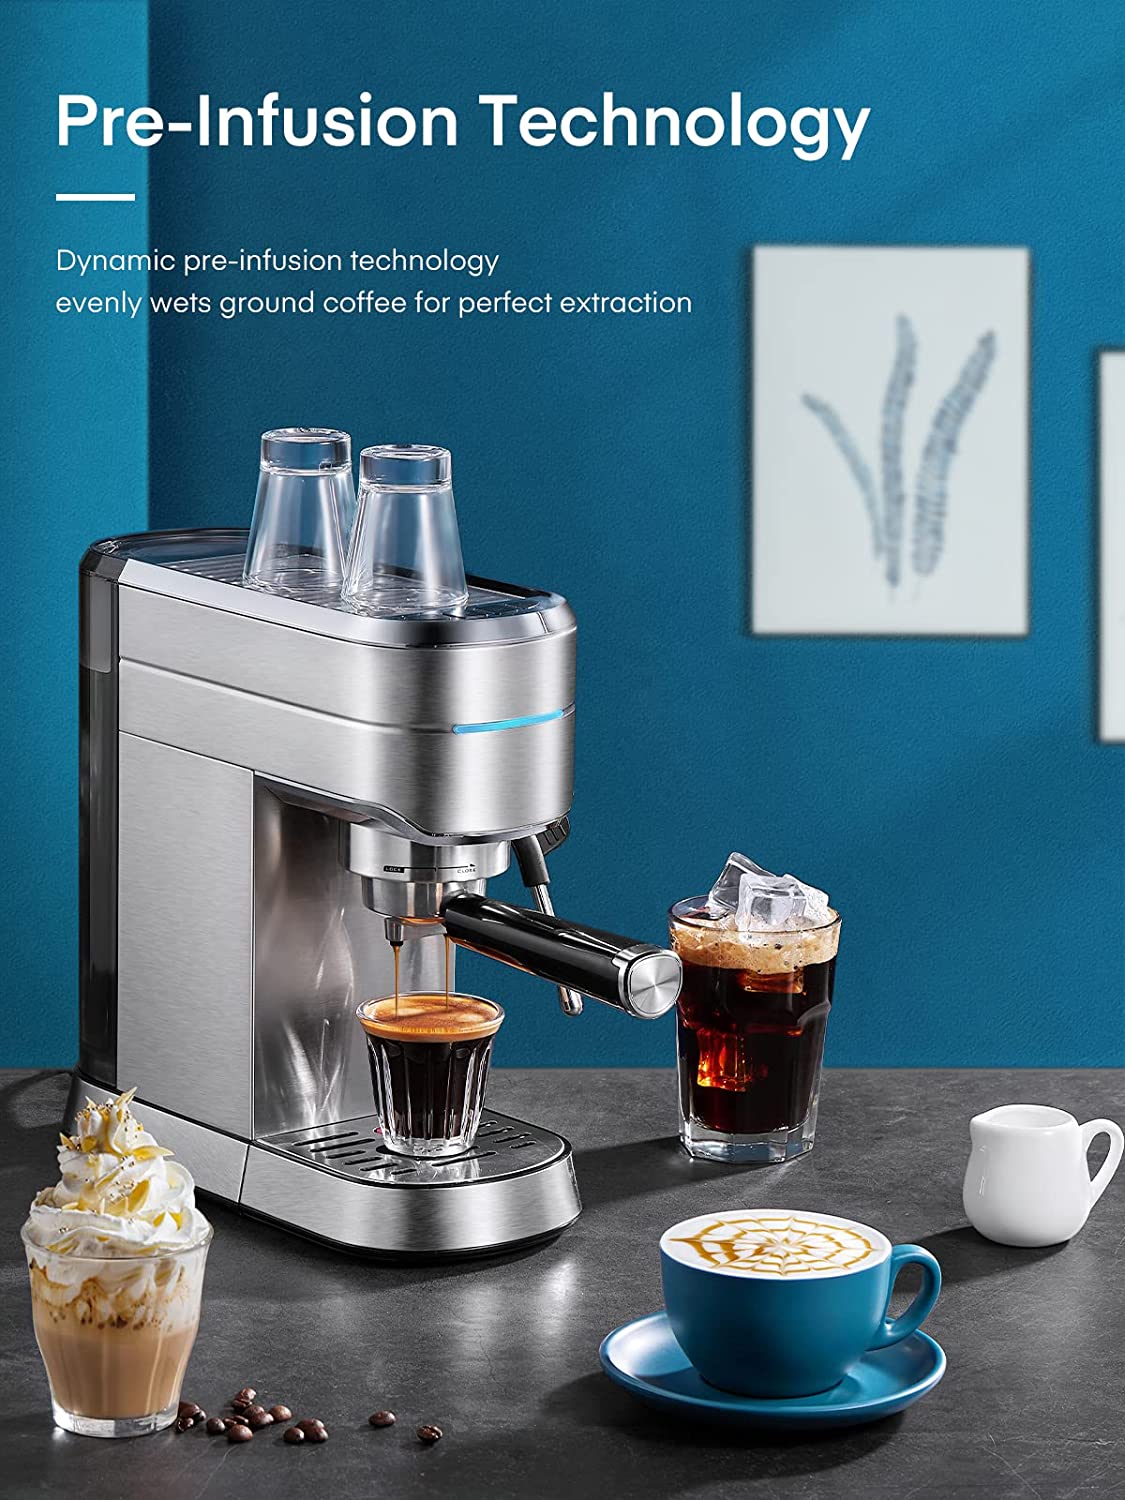 pre-infusion technology, HOUSNAT Espresso Machine, 20 Bar Espresso and Cappuccino Maker with Milk Frother Steam Wand, Professional Espresso Coffee Machine for Cappuccino and Latte, Compact Design, Brushed Stainless Steel